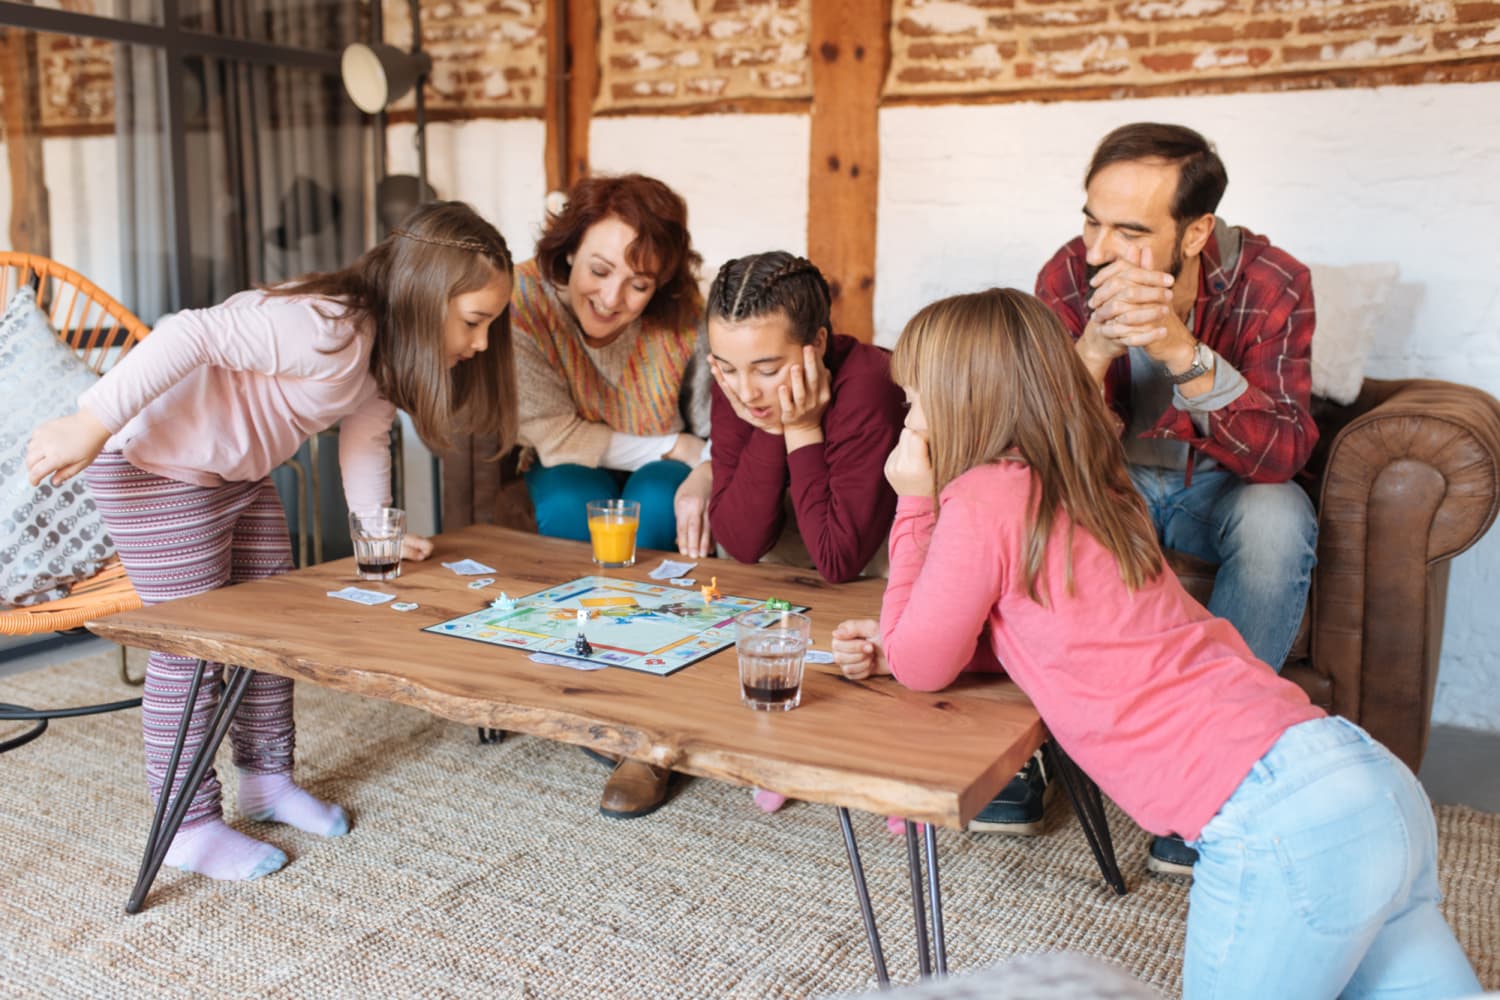 31 Best Party Board Games To Play With Friends Fun Ideas For